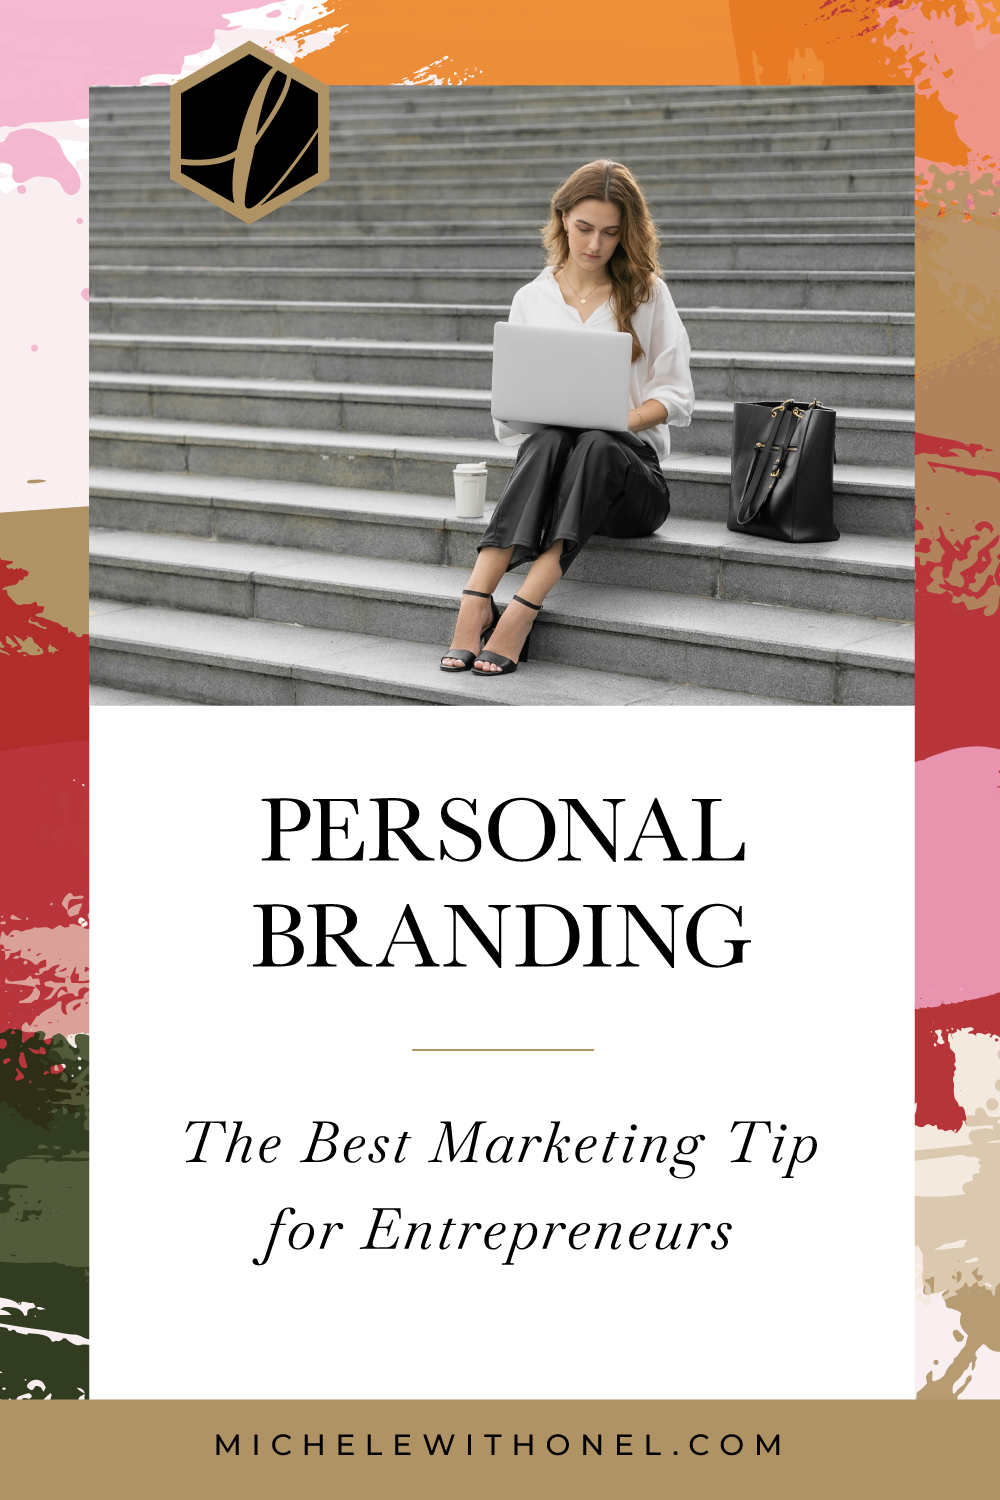 Looking for some personal branding ideas? This post is for you! Discover what personal branding is and why you need it—including tips on how to build a personal brand, why it’s important for marketing, and the power behind brand photography. #branding #entrepreneur #marketing #business